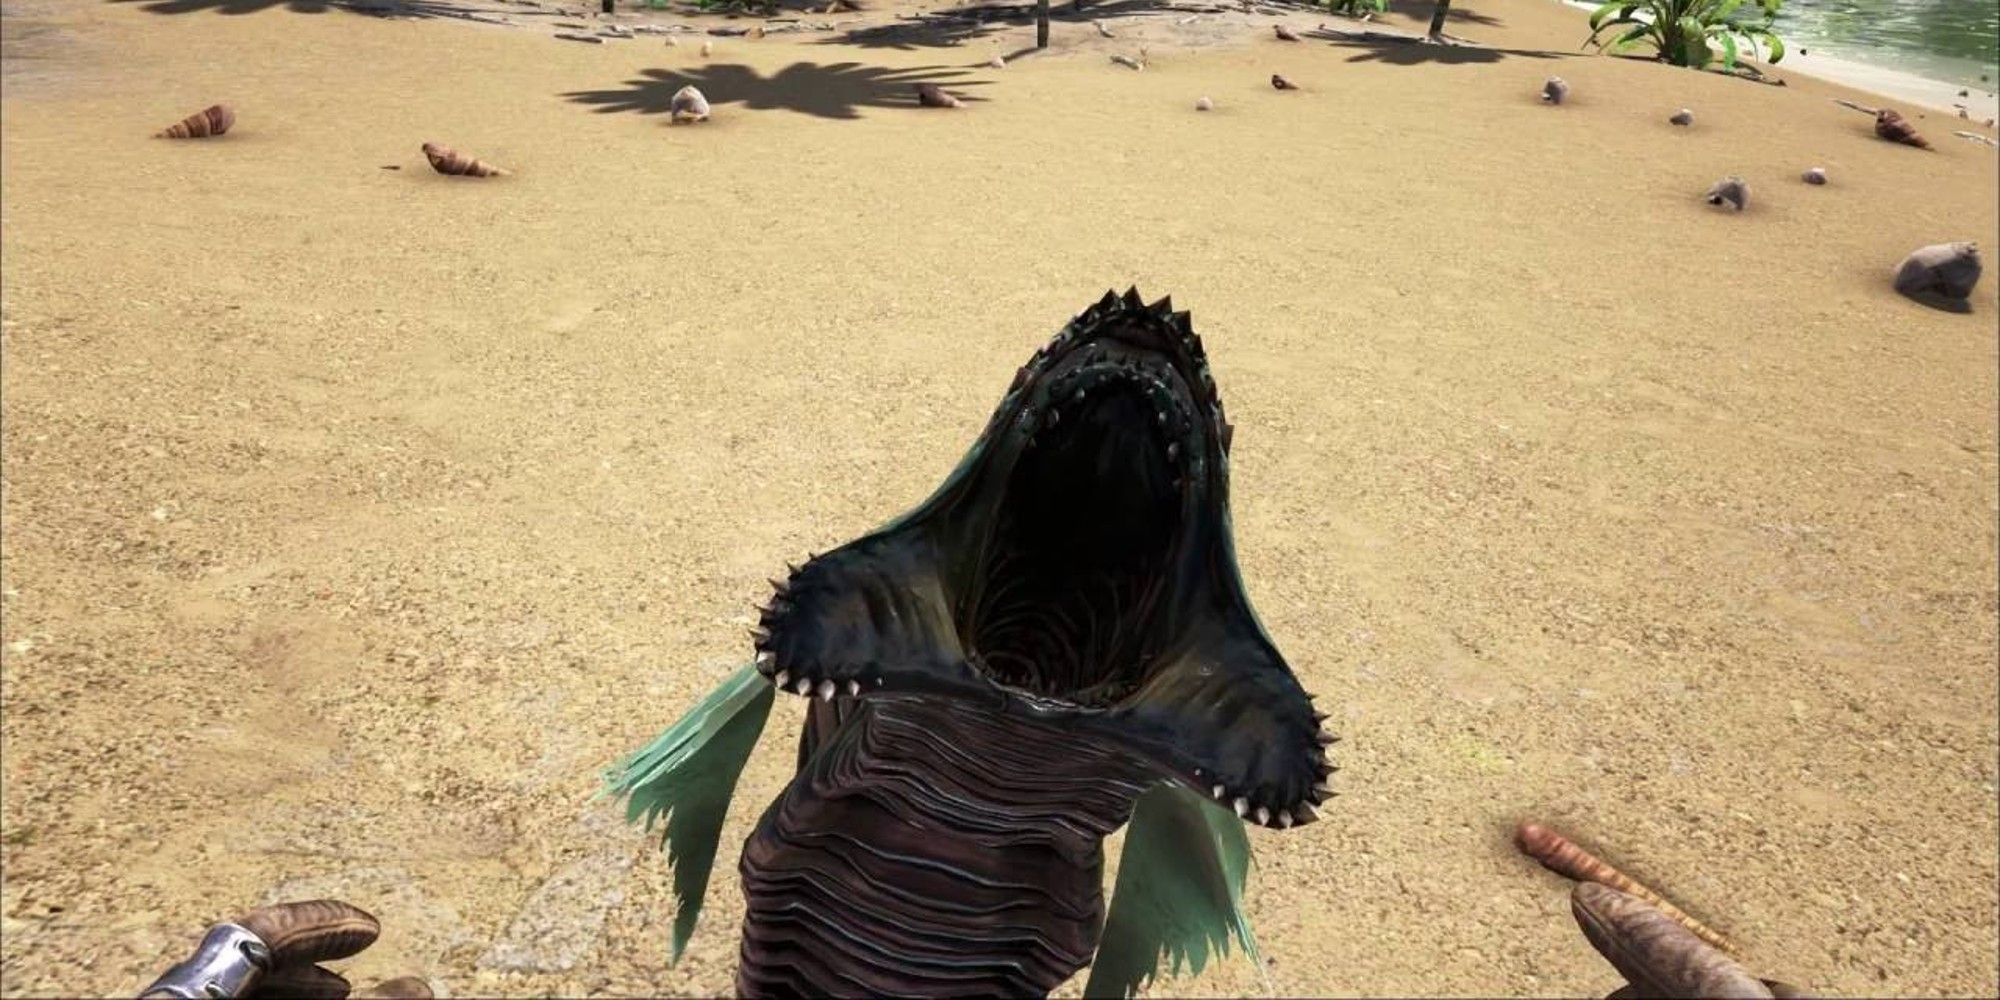 How TO Get Rid Of Leeches In ARK: Survival Evolved